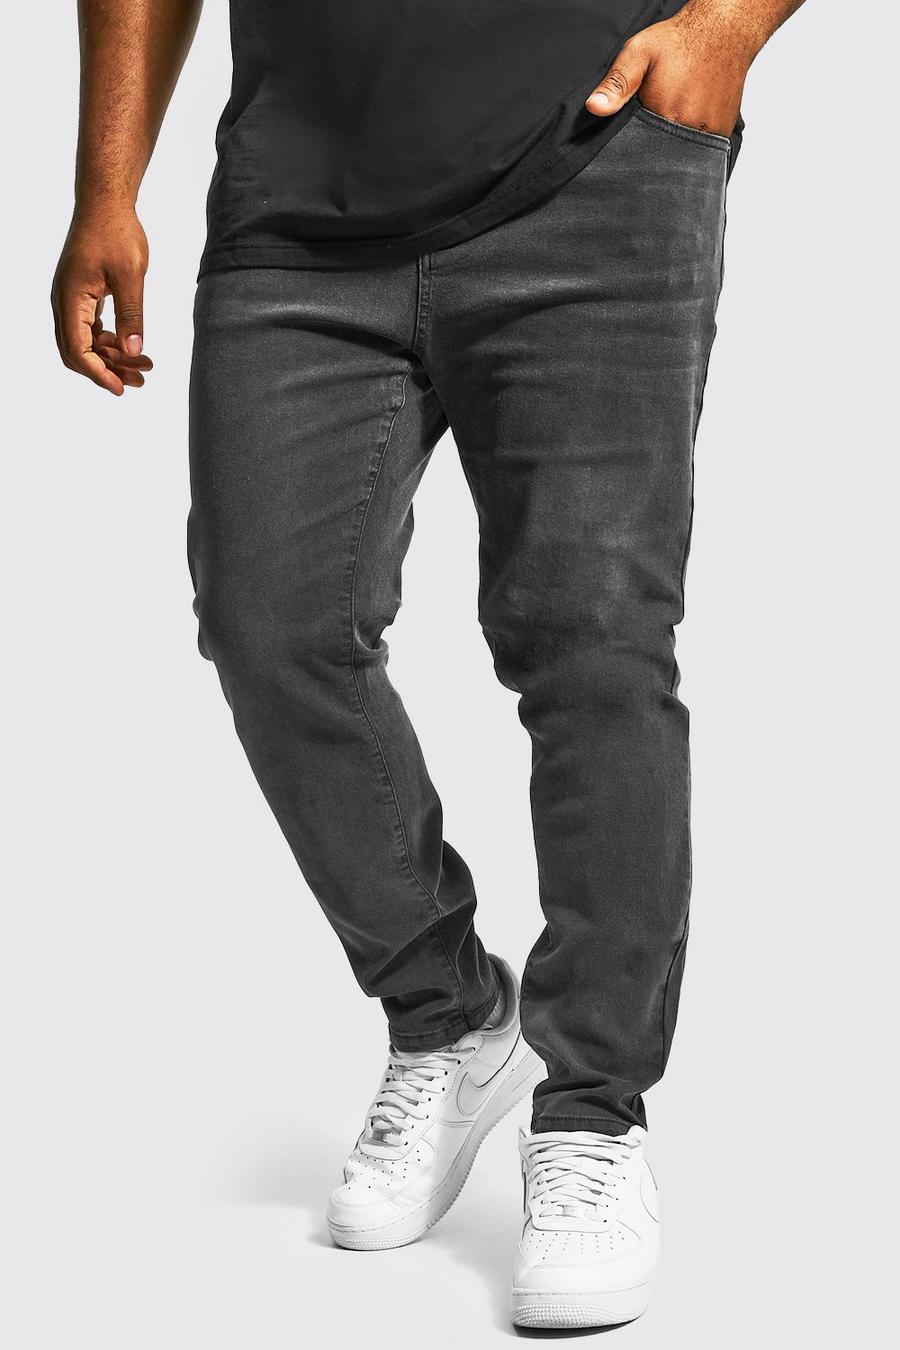 Jeans Plus Size Skinny Fit in Stretch in poliestere riciclato, Charcoal grigio image number 1